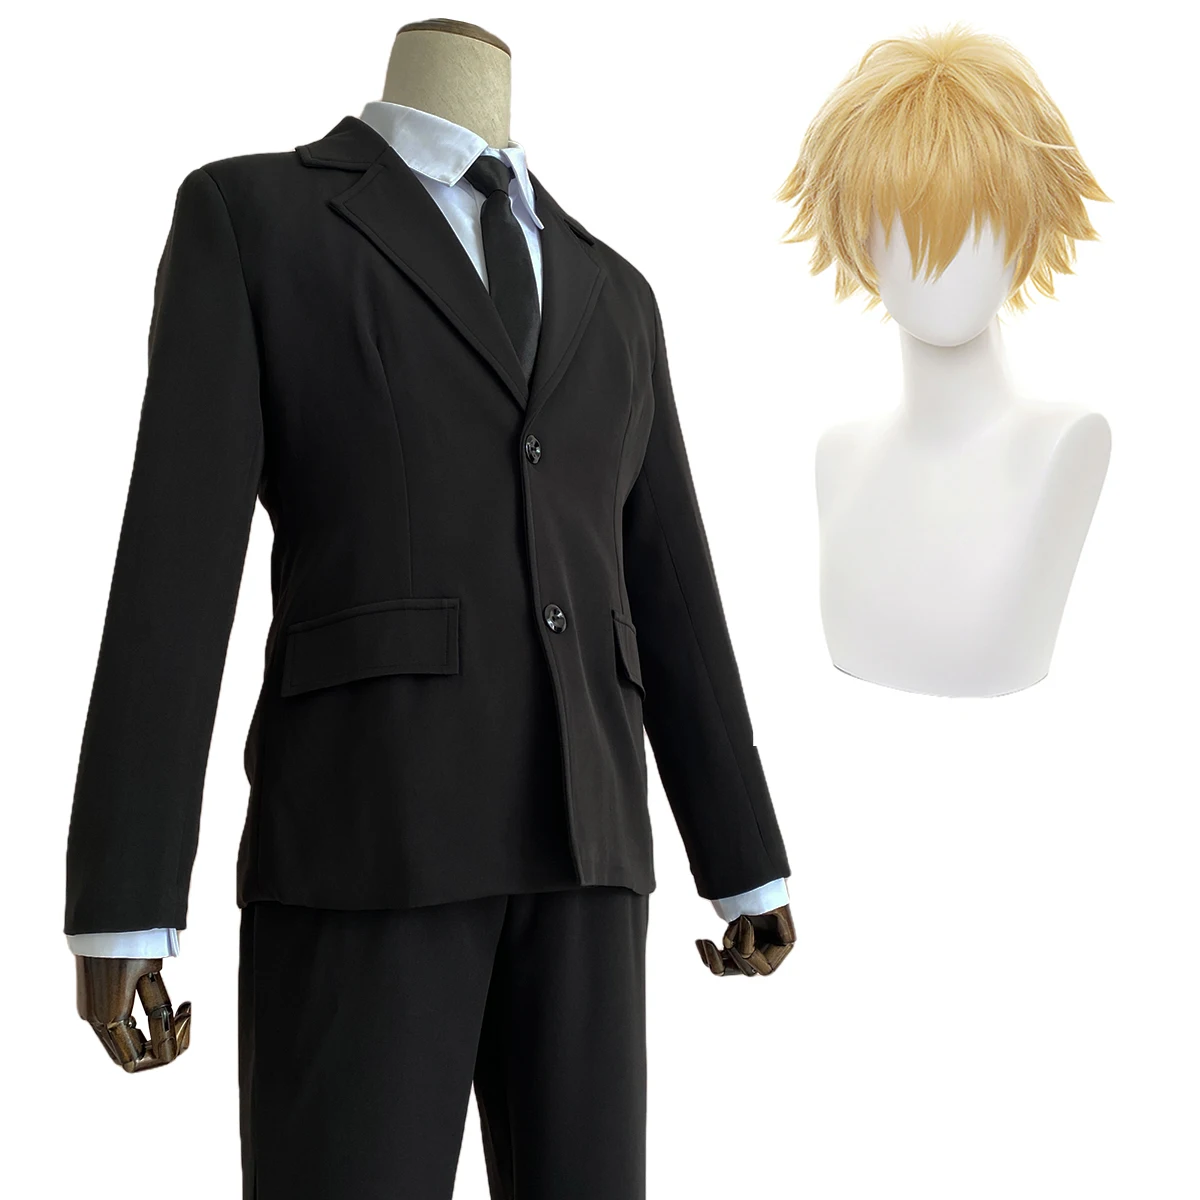 6pcs Chainsaw Man Anime Power Cosplay Costume Outfit + Cosplay Wig Women  Cosplay Jacket Pants Uniform Halloween Party Fancy Dress Up Set 